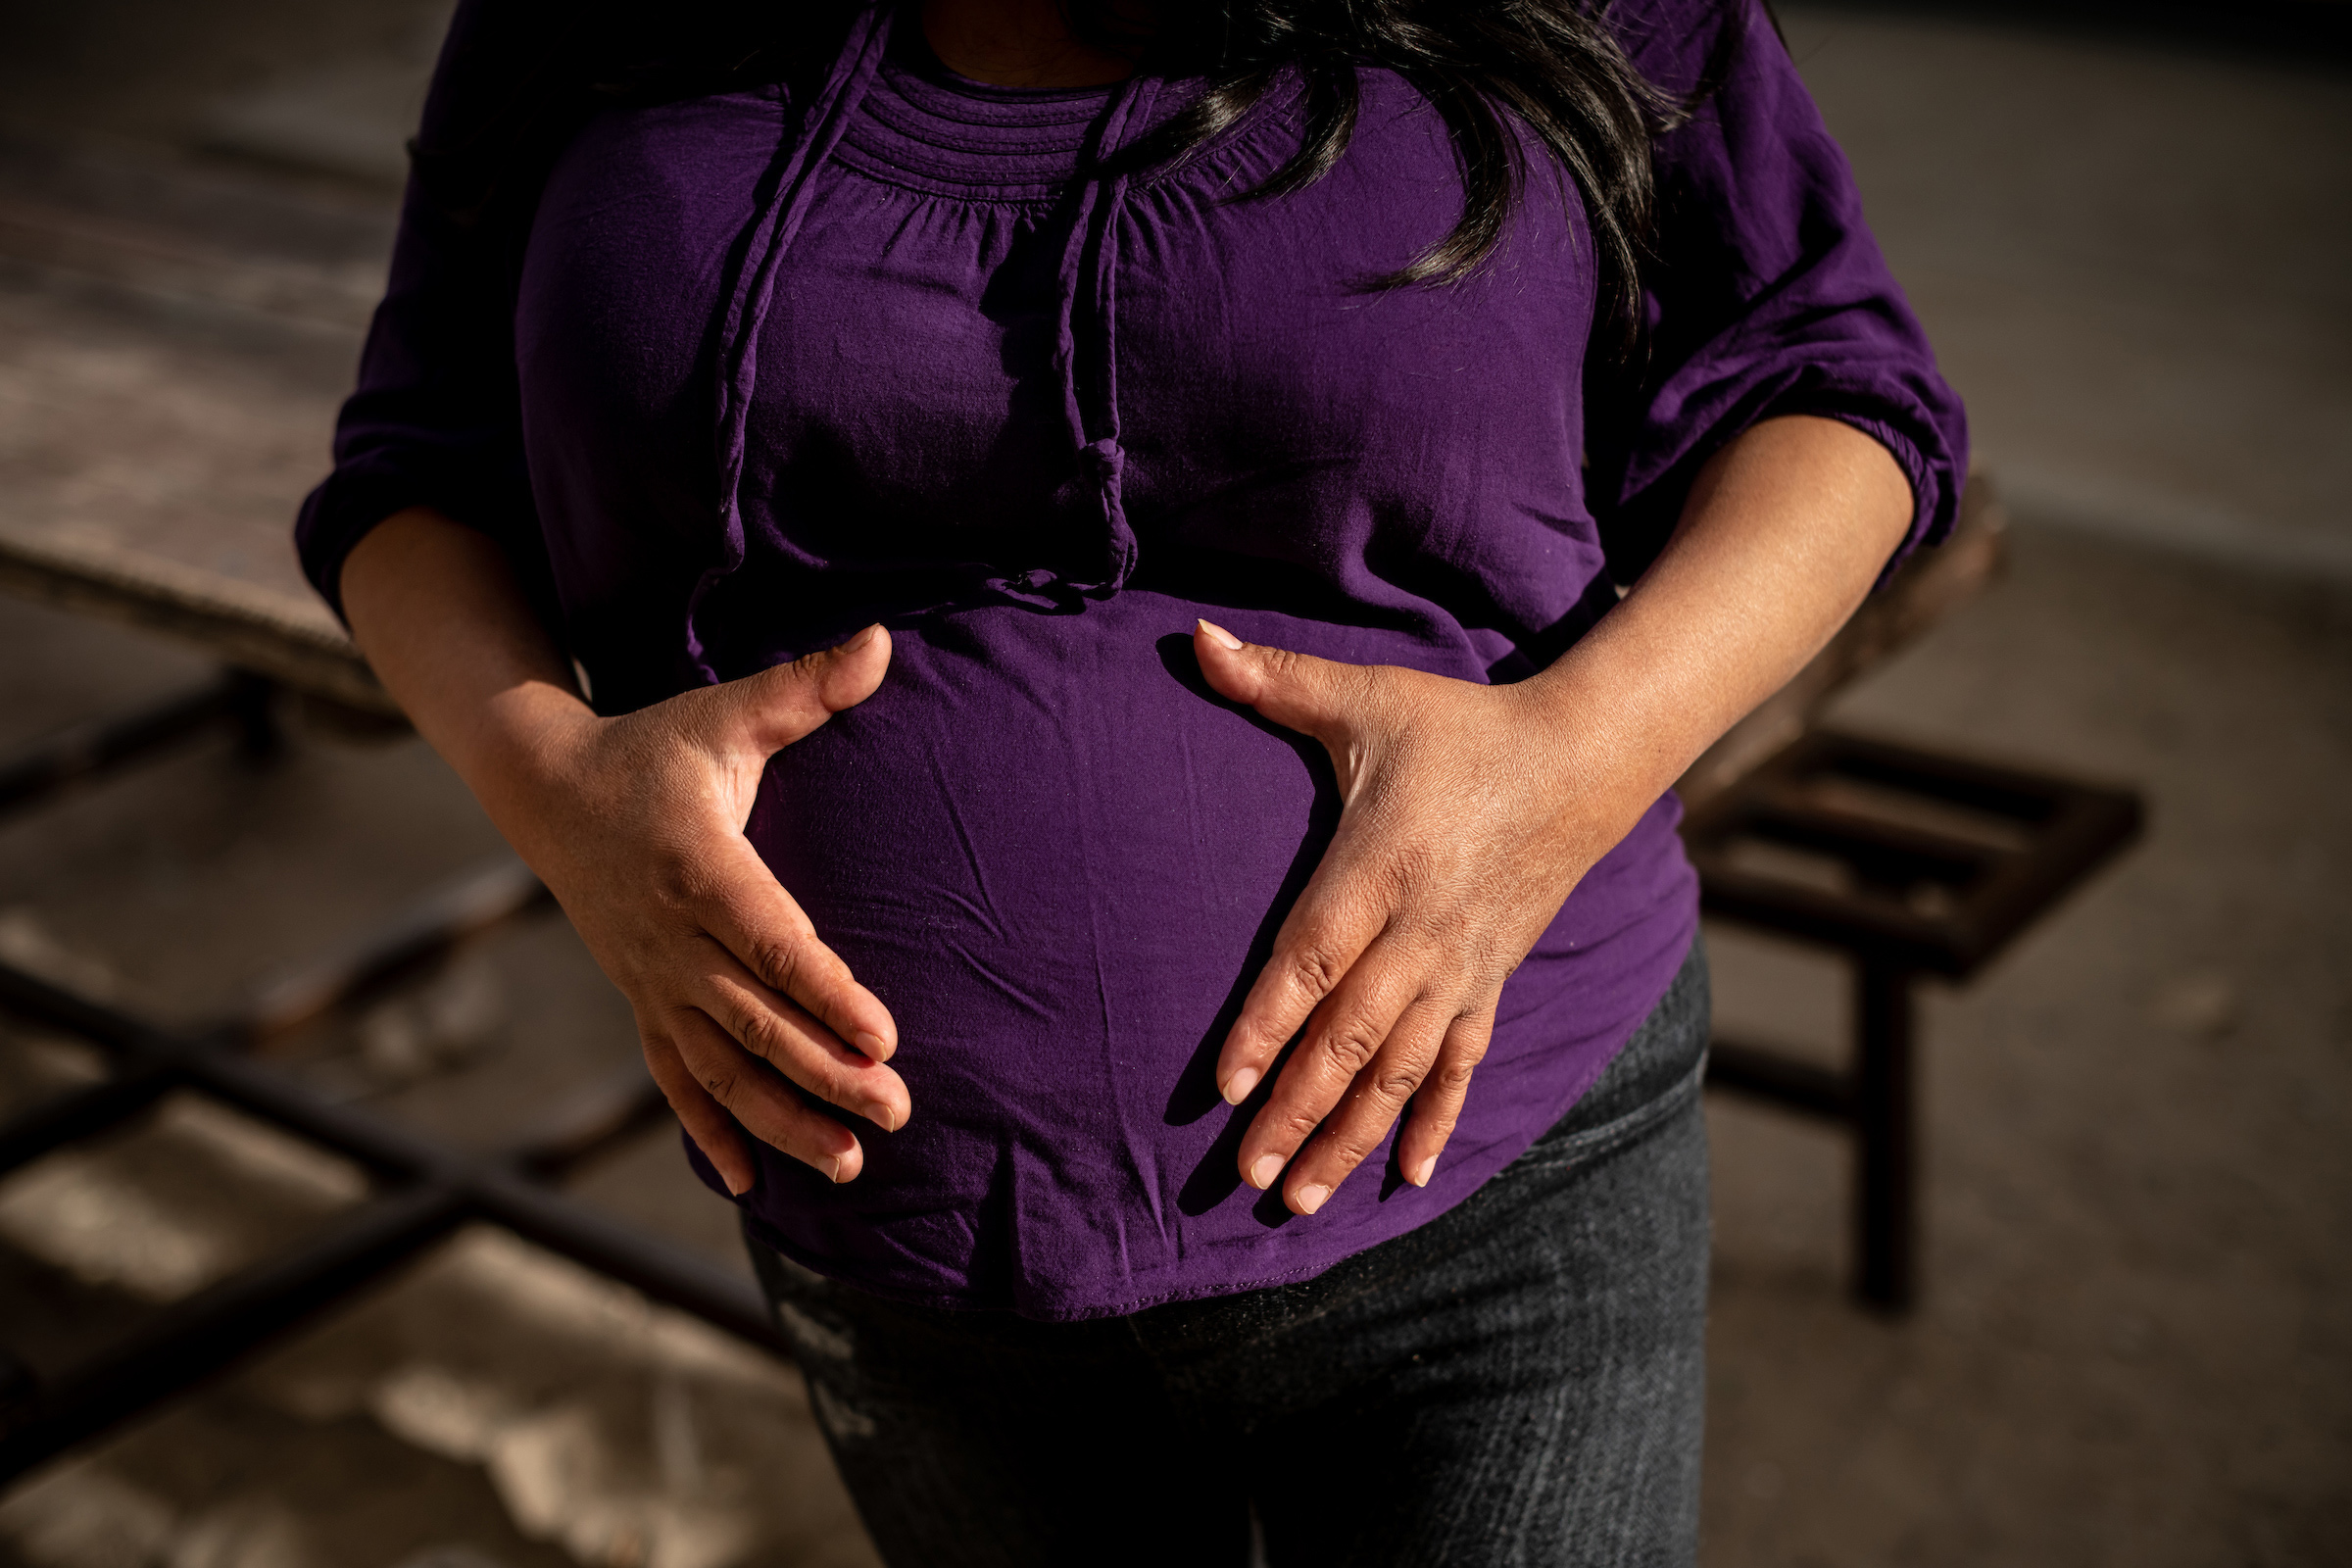 Lina, a migrant from Guatemala, poses for a portrait at 35 weeks pregnant. She is receiving support from the Las Zadas pregnancy project and is living with her daughter at the San Juan Apóstol migrant shelter.